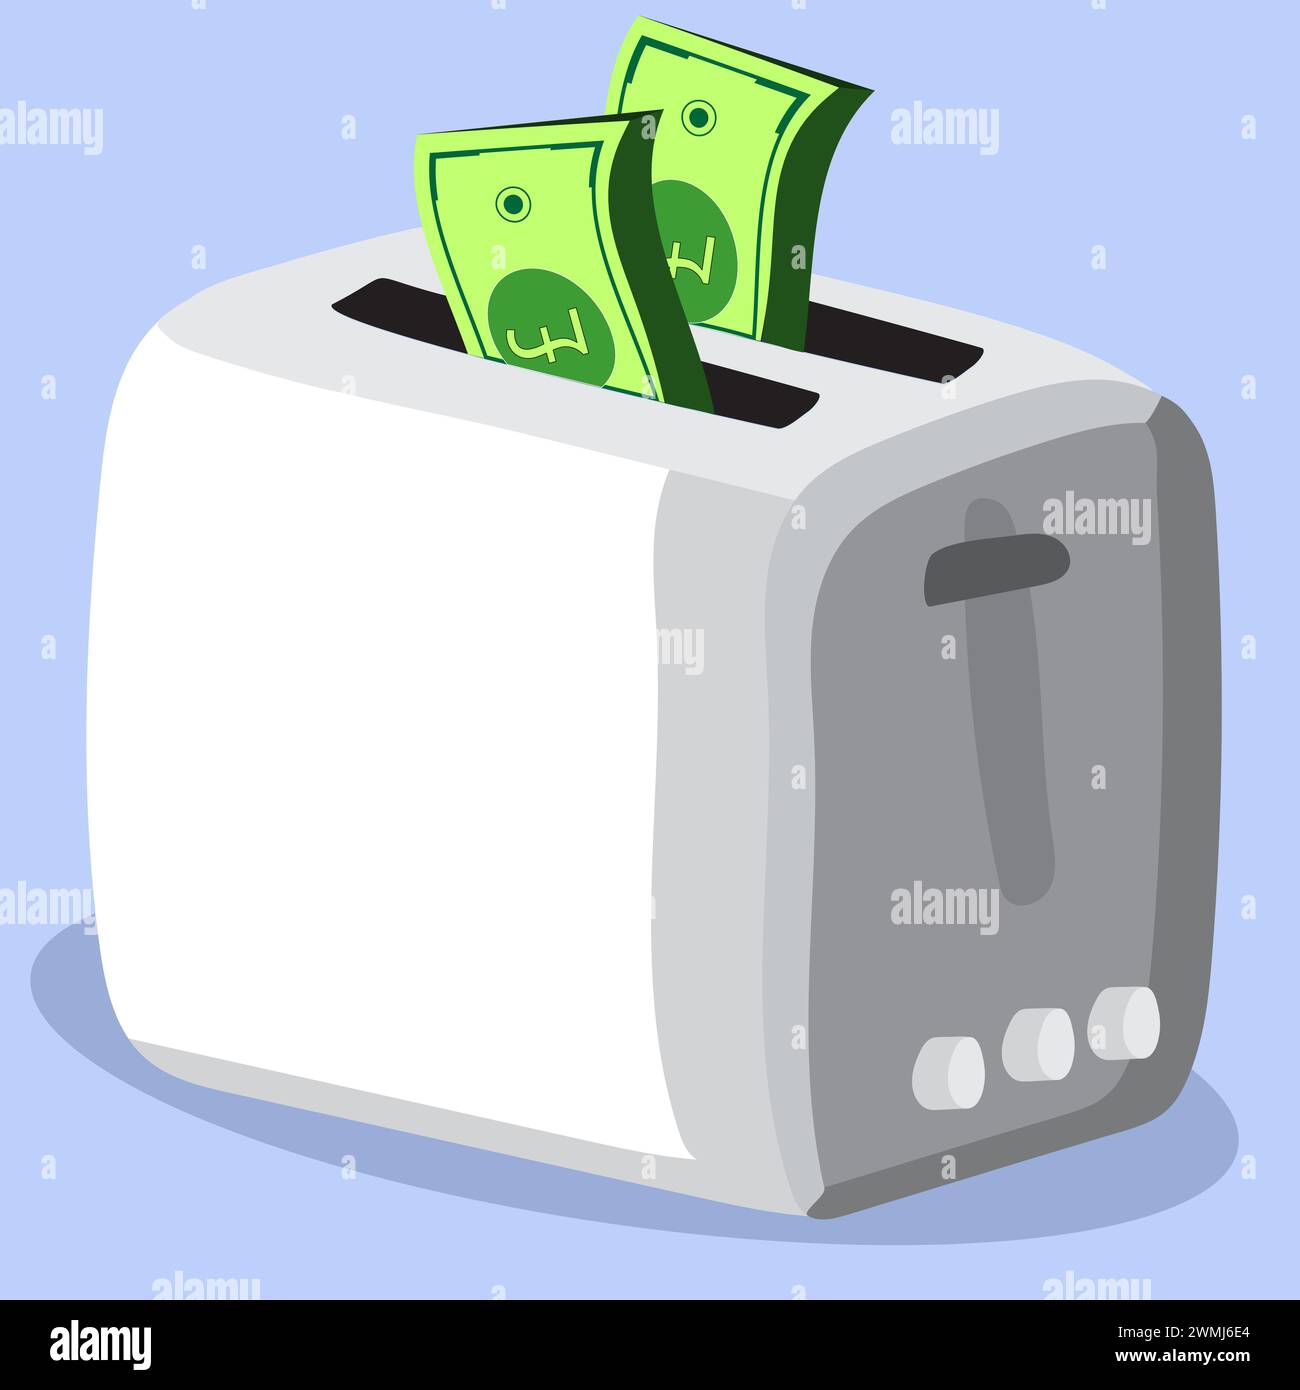 Cartoon representation of the Toaster Tax in relation to recycling old toasters,  Money in toaster, toaster tax concept Stock Vector